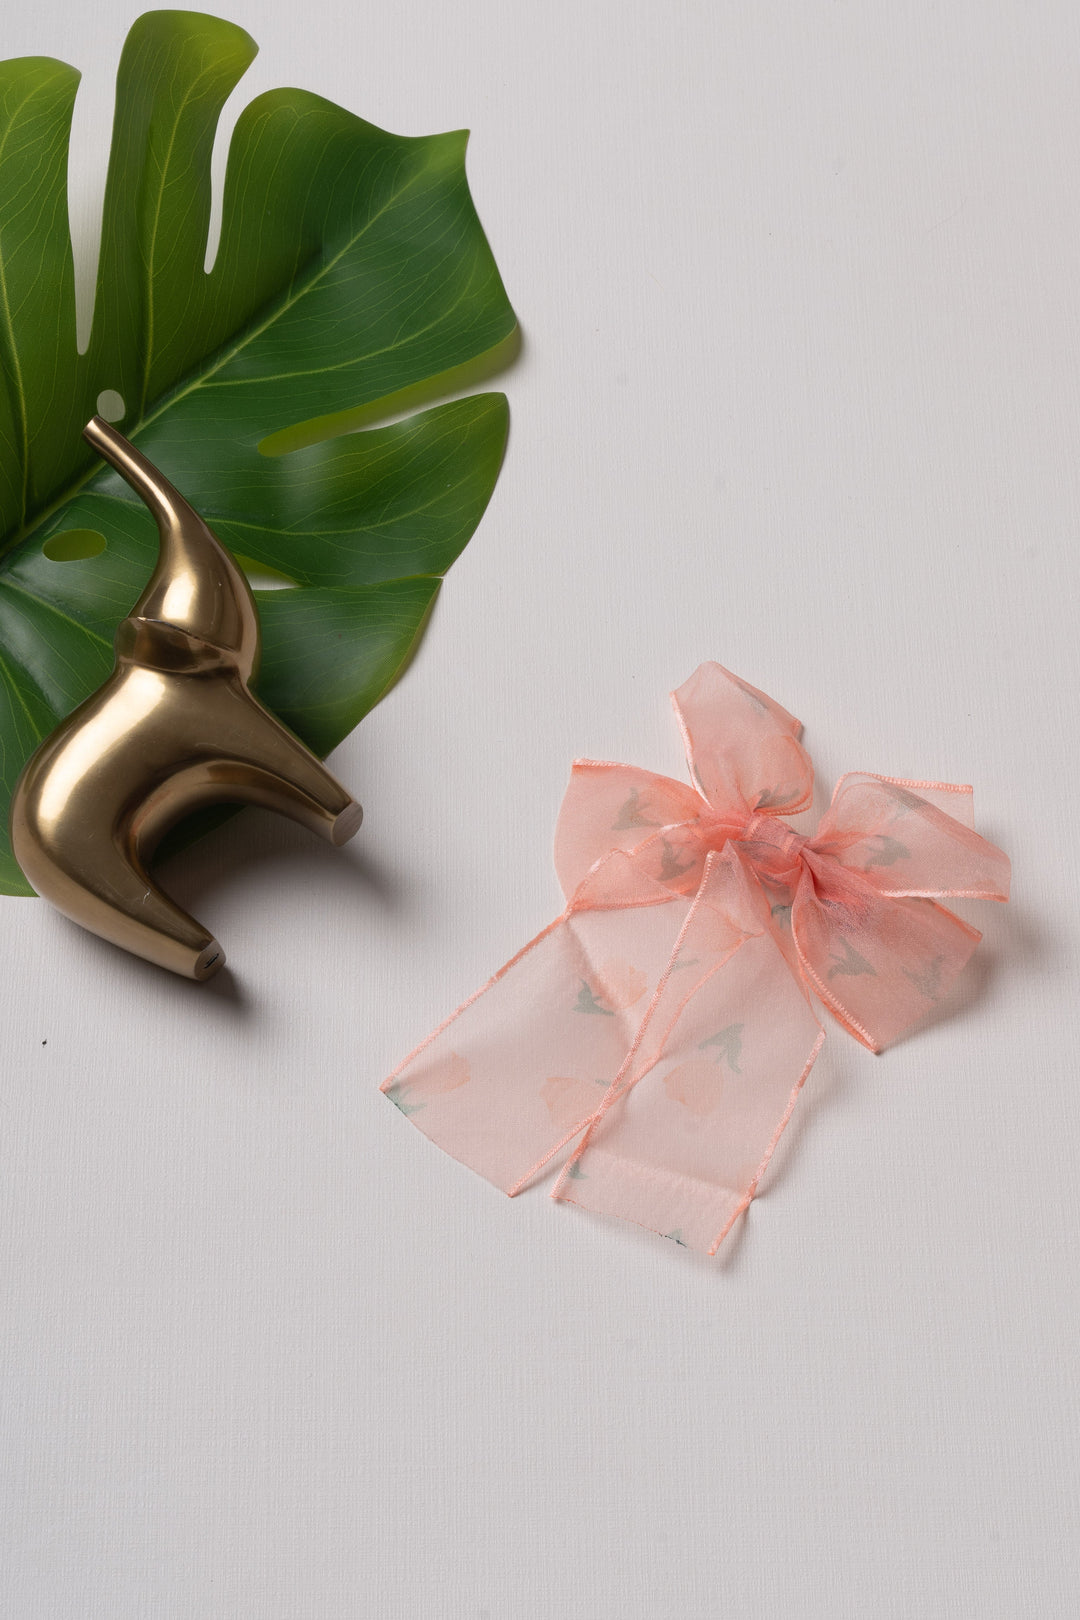 The Nesavu Hair Clip Salmon Flutter Bow Clip - A Whimsical Touch for Your Little Girl's Hairstyle Nesavu Salmon JHCL71B Charming Salmon Flutter Bow Hair Clip for Girls | Perfect Accessory for Styling | The Nesavu